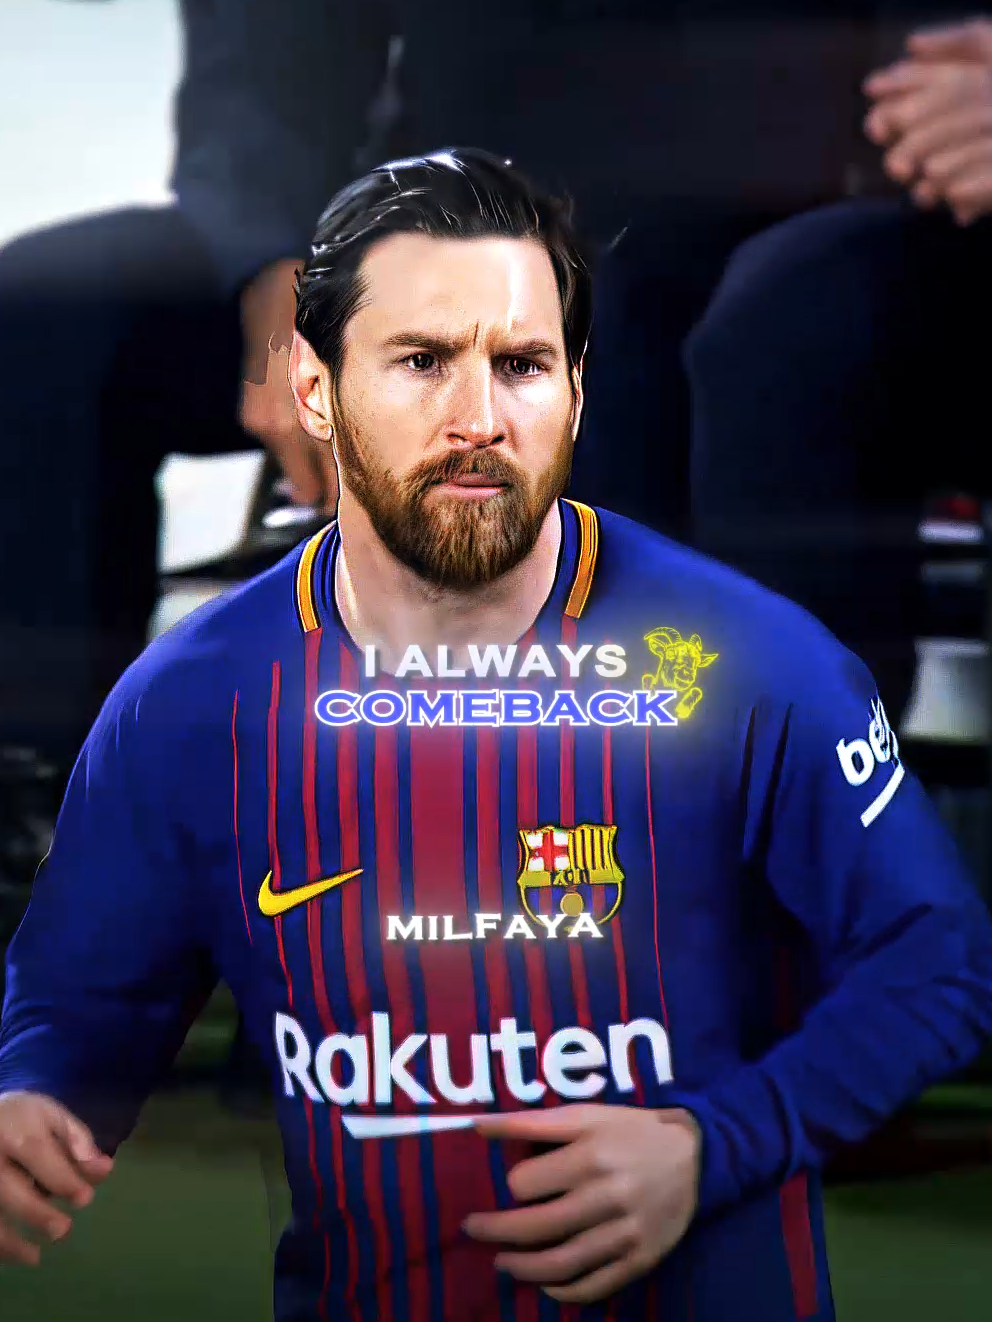 The GOAT always comebacks🐐🔥| bad quality:( | #milfayaedits #aftereffects #messi #blowthisup #fyp